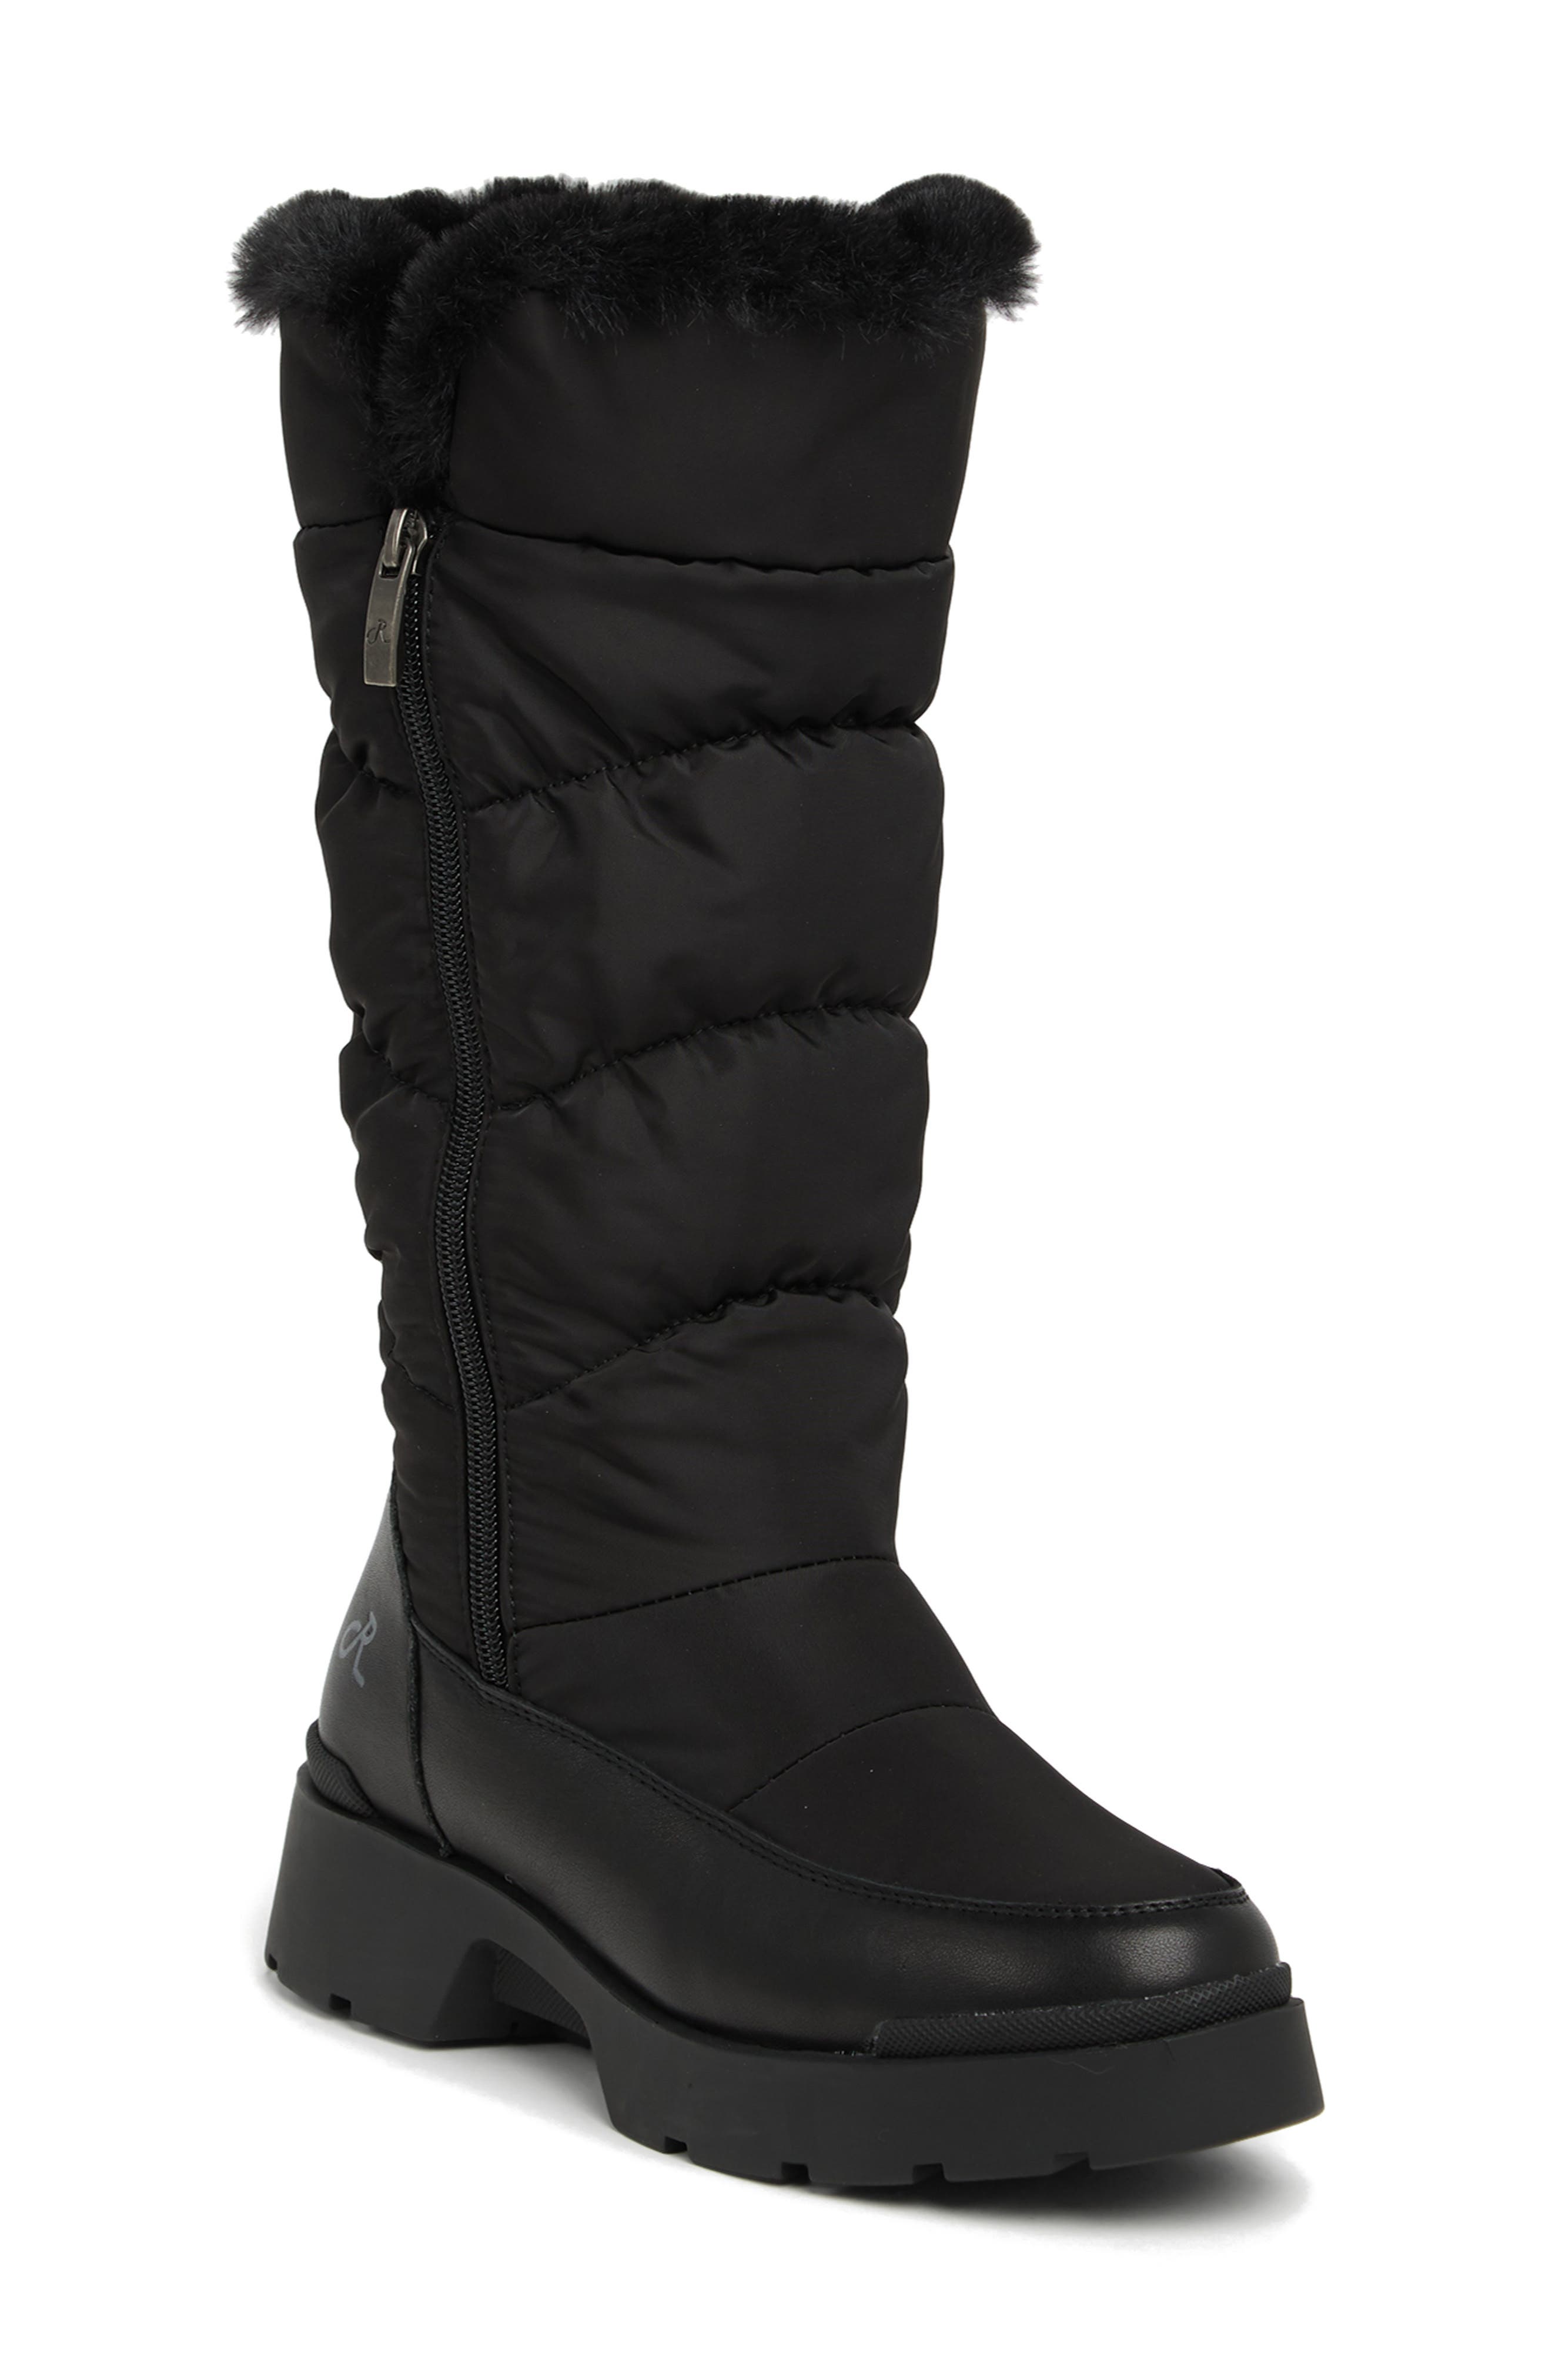 Dime Faux Fur Lined Waterproof Boot Religious Comfort